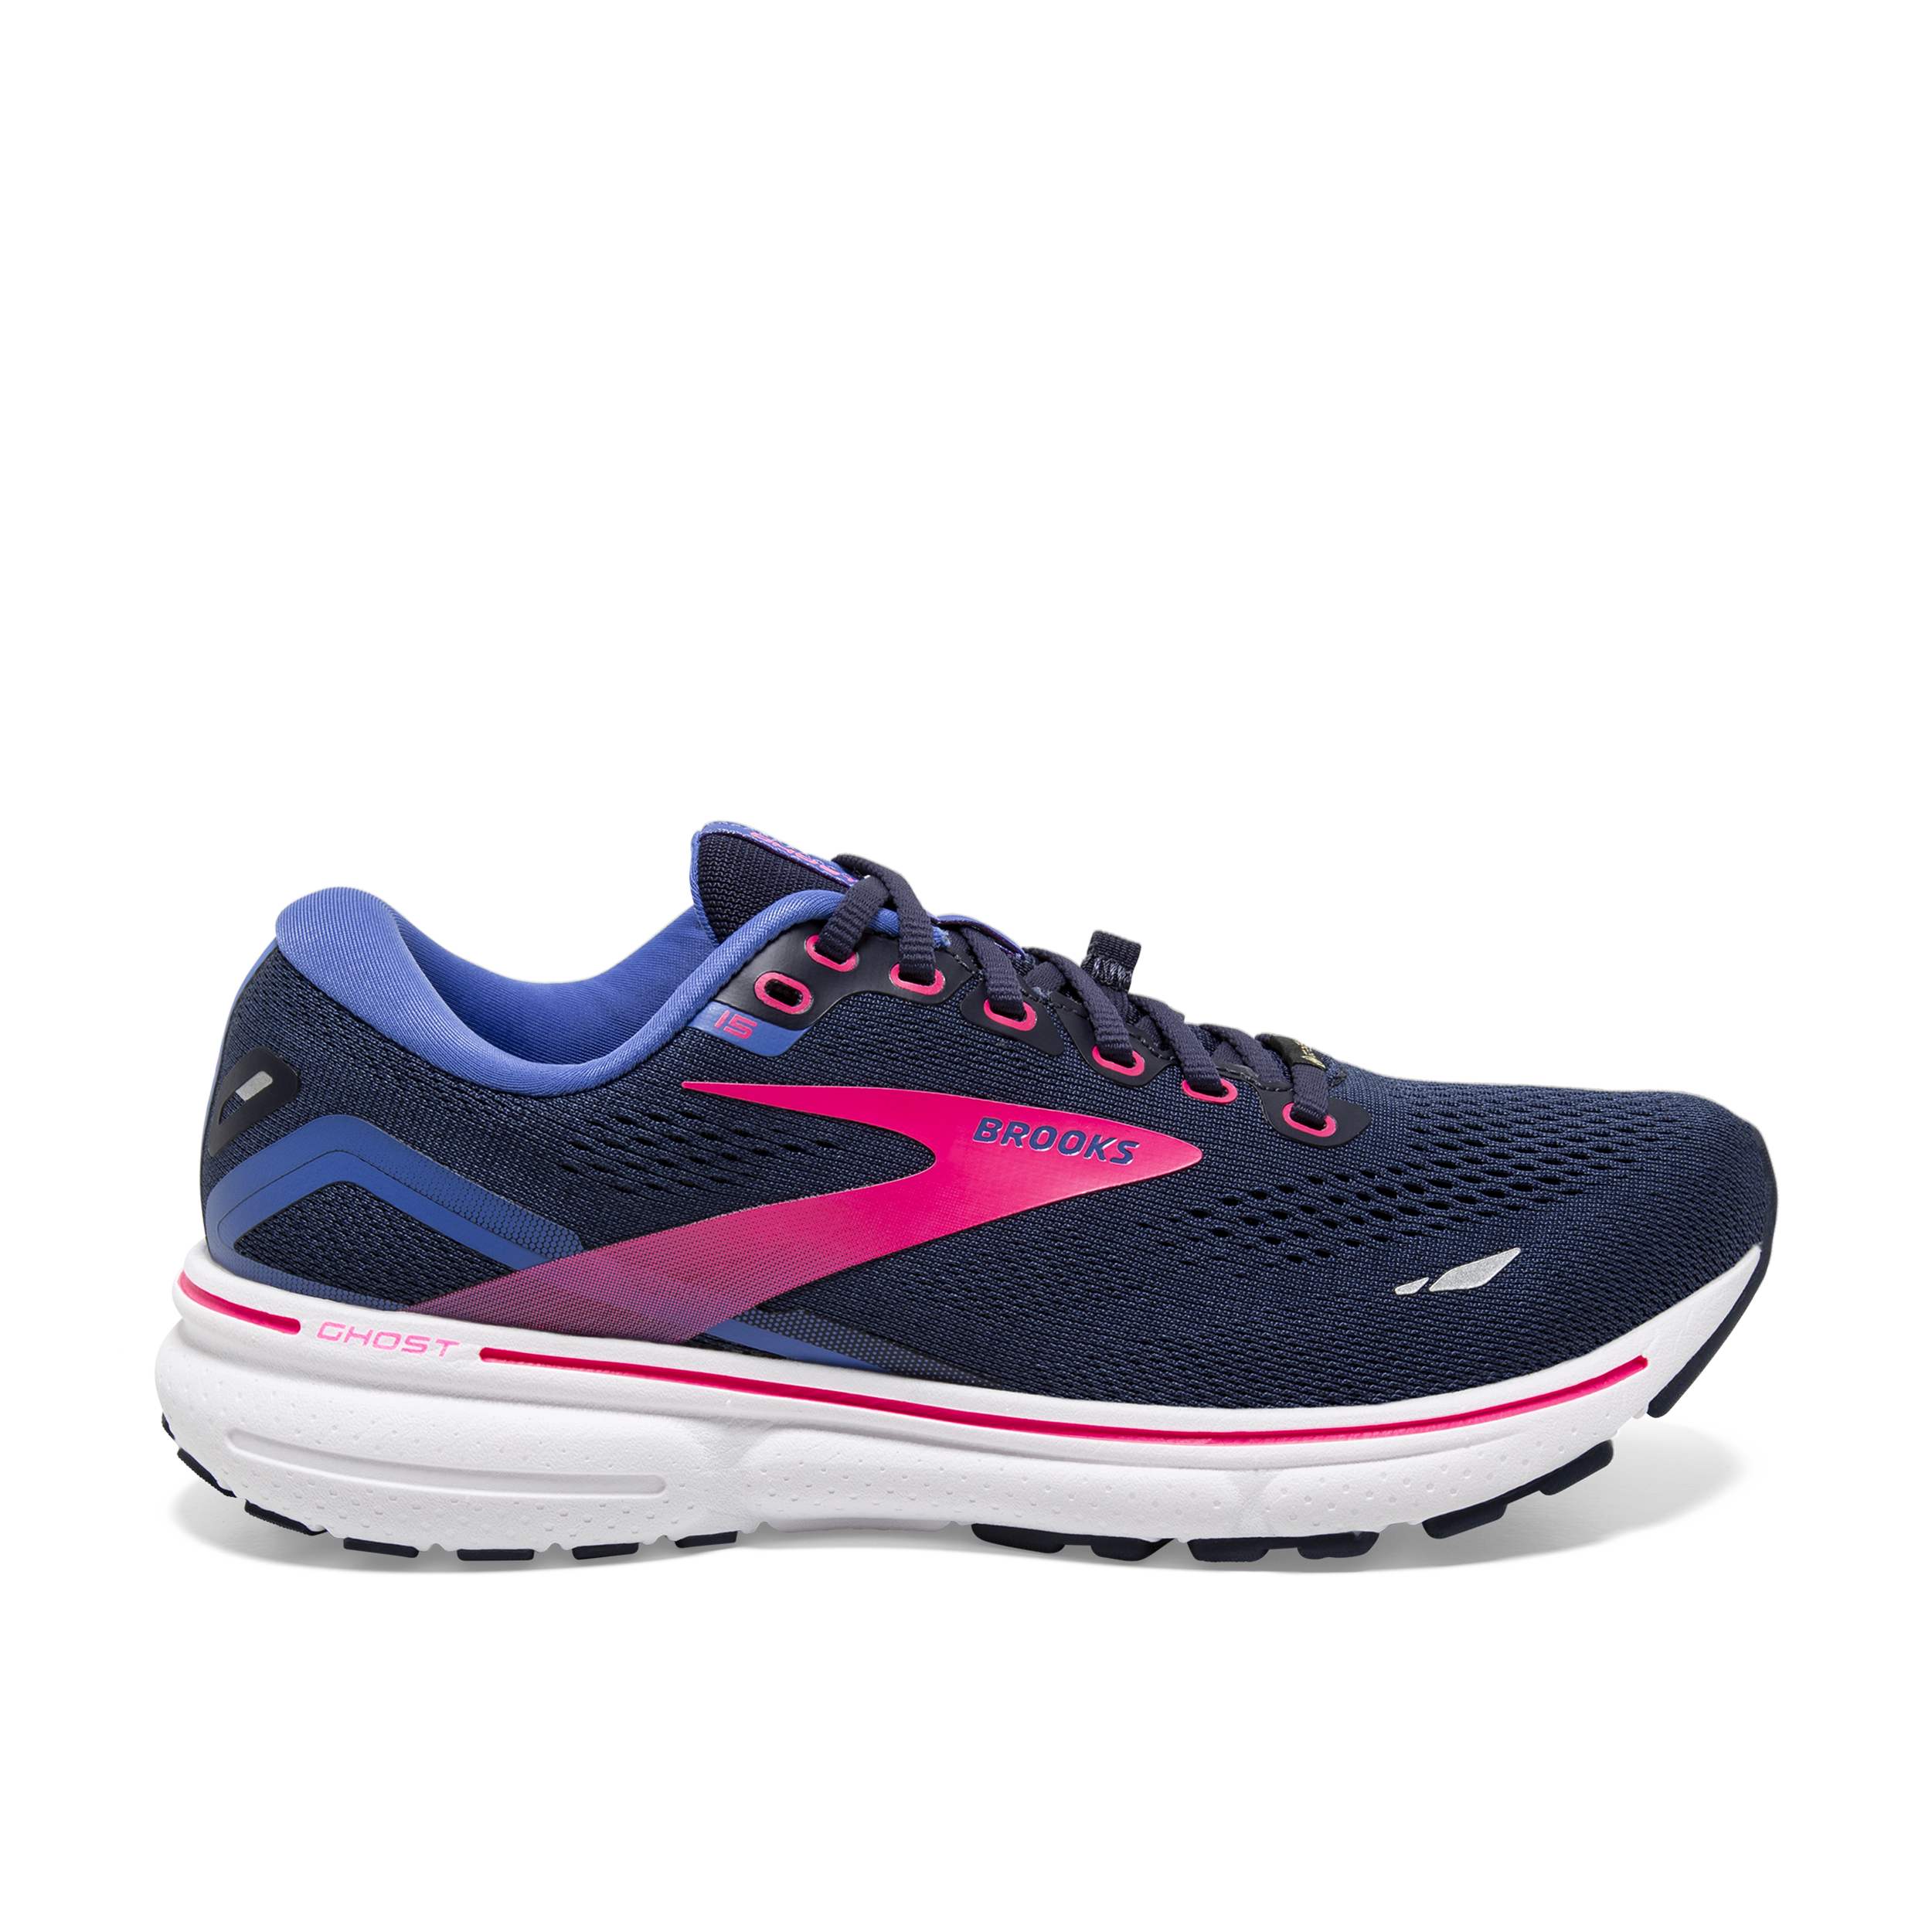 Women's Ghost 15 GTX Running Shoes, Cushioned Running Shoes